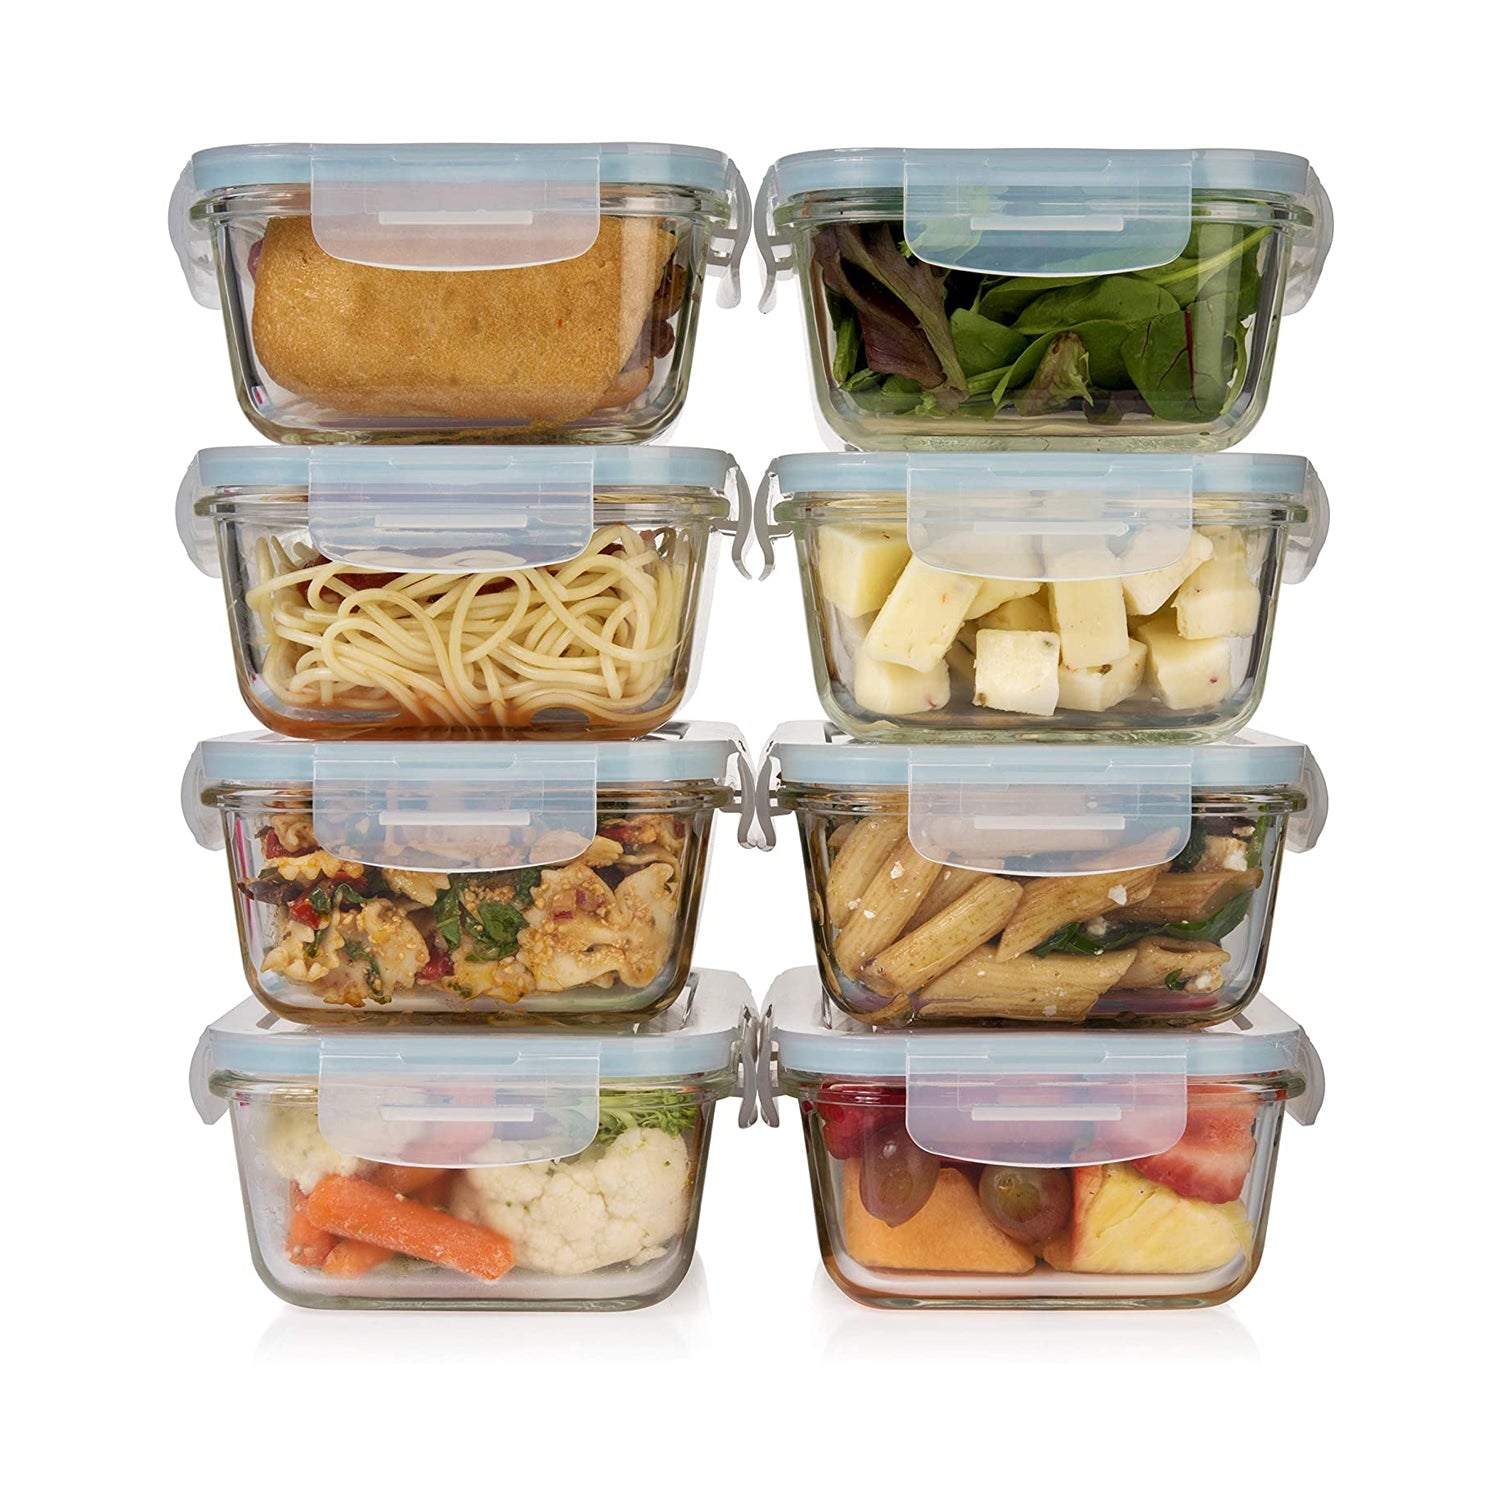 Bayco 8 pack 30oz glass food storage containers, bayco glass meal prep  containers, airtight glass storage containers with lids - bpa